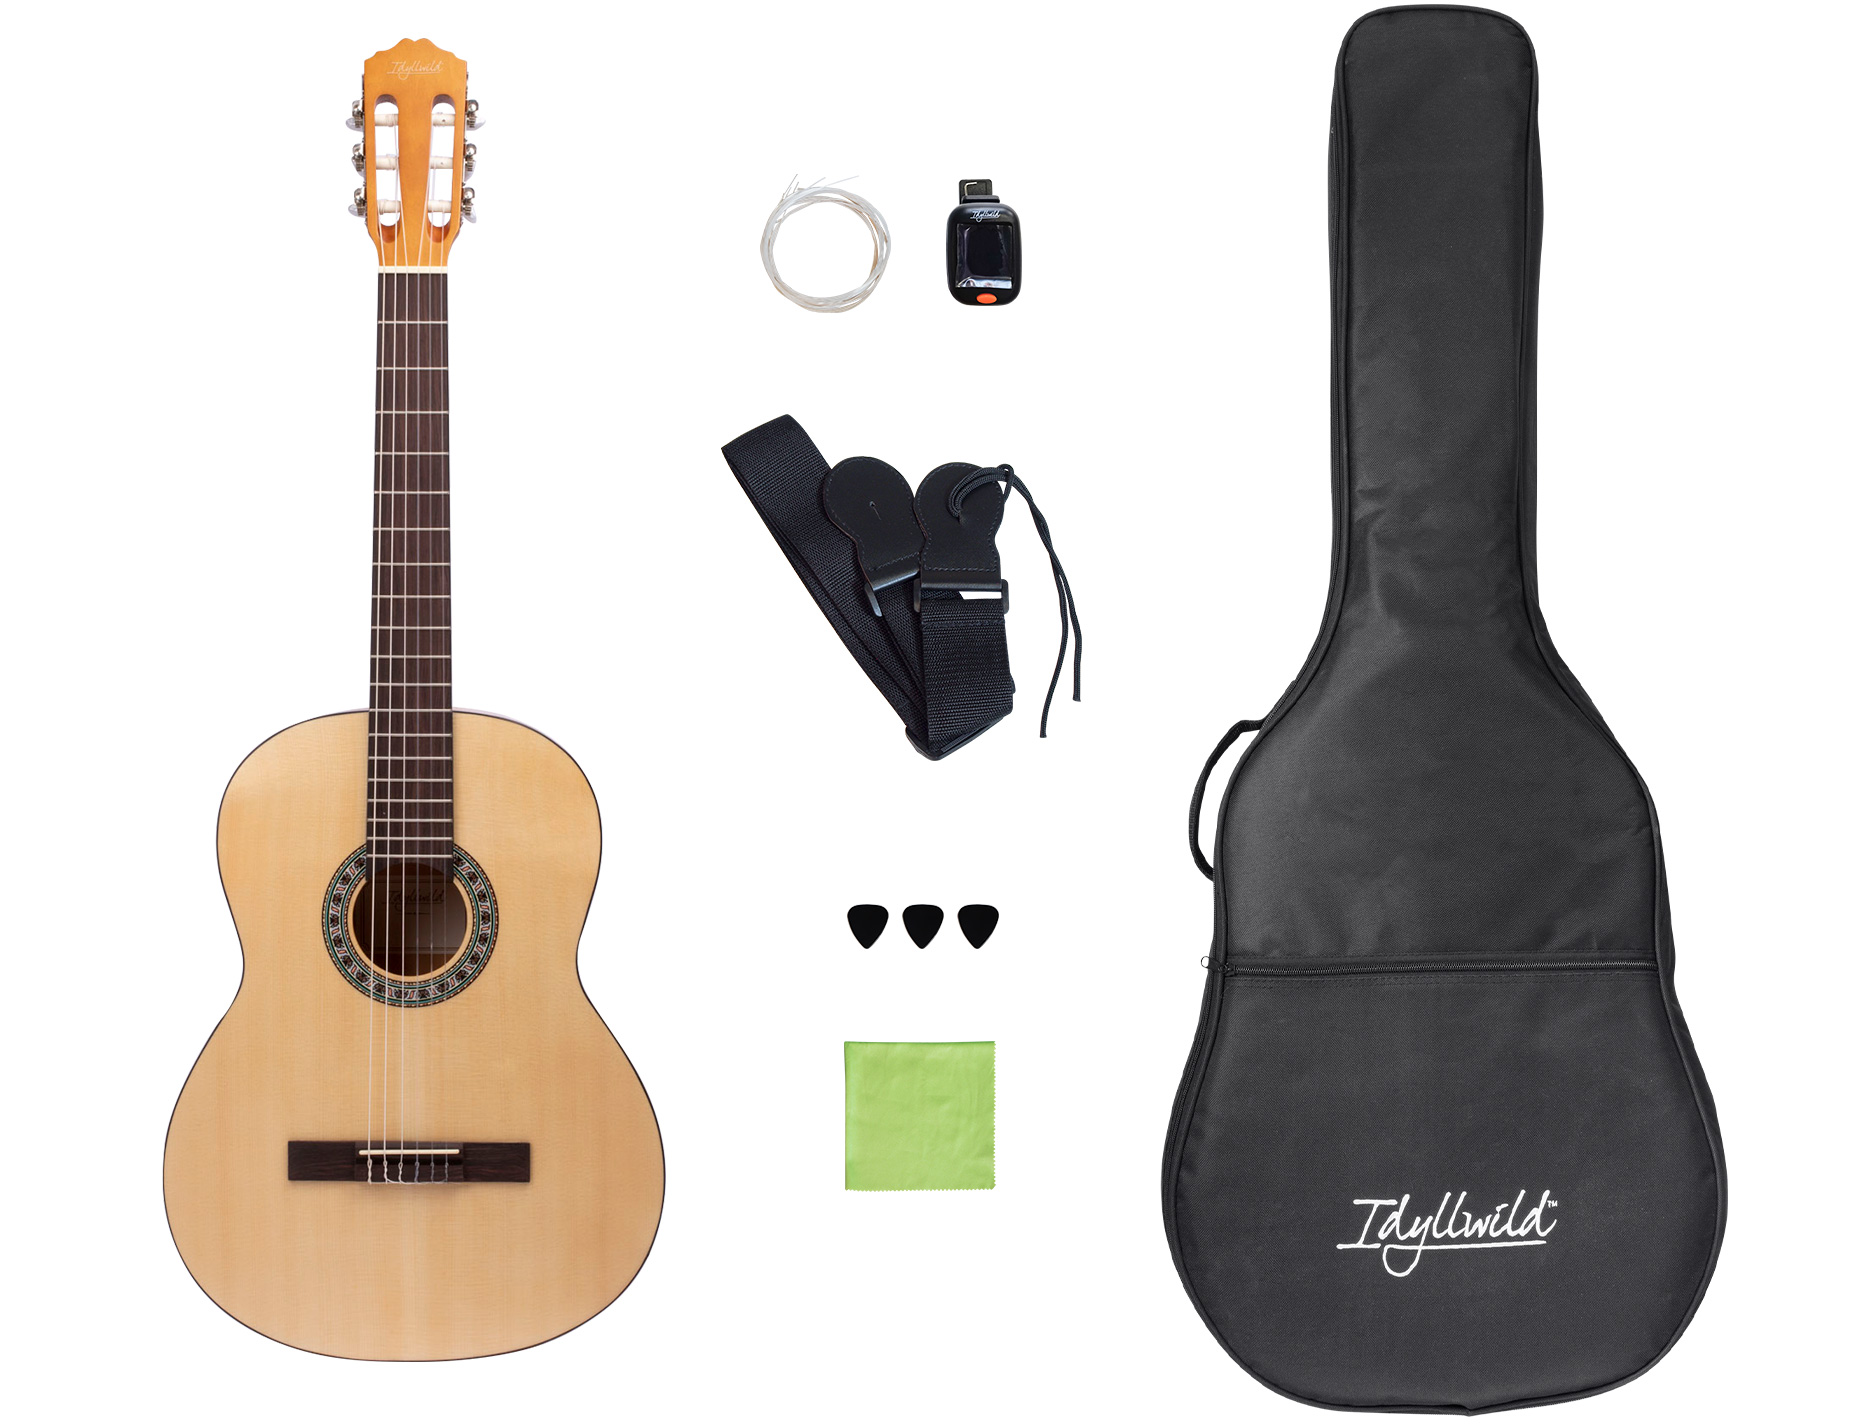 Monoprice Idyllwild by Full-Size 4/4 Spruce Top Classical Nylon String Guitar with Accessories and Gig Bag